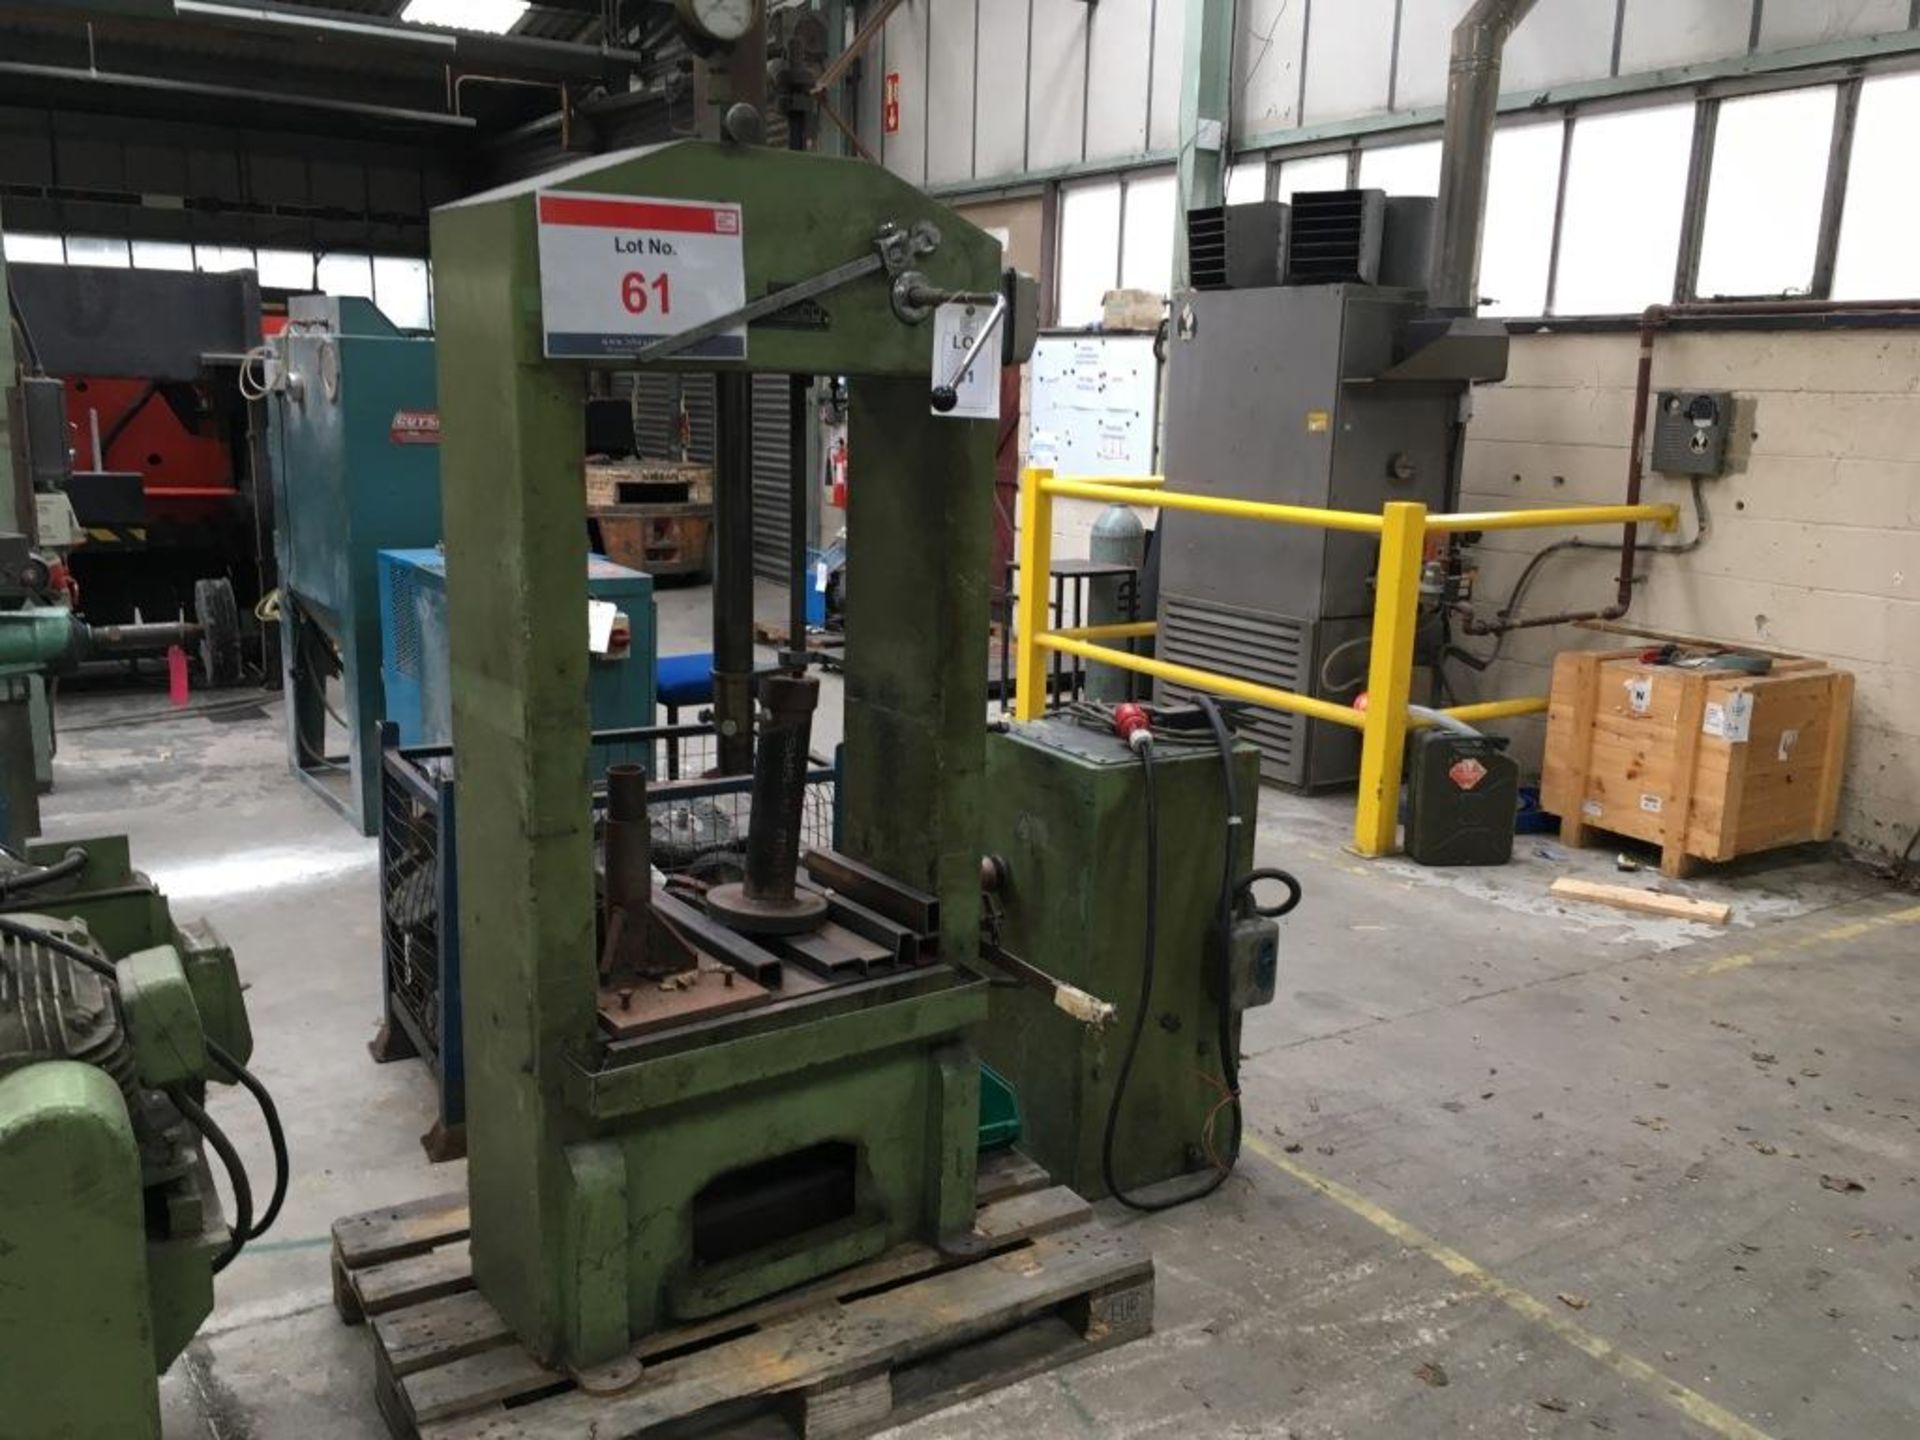 Marlco hydraulic press. The purchaser is required to satisfy themselves as to the safety of this